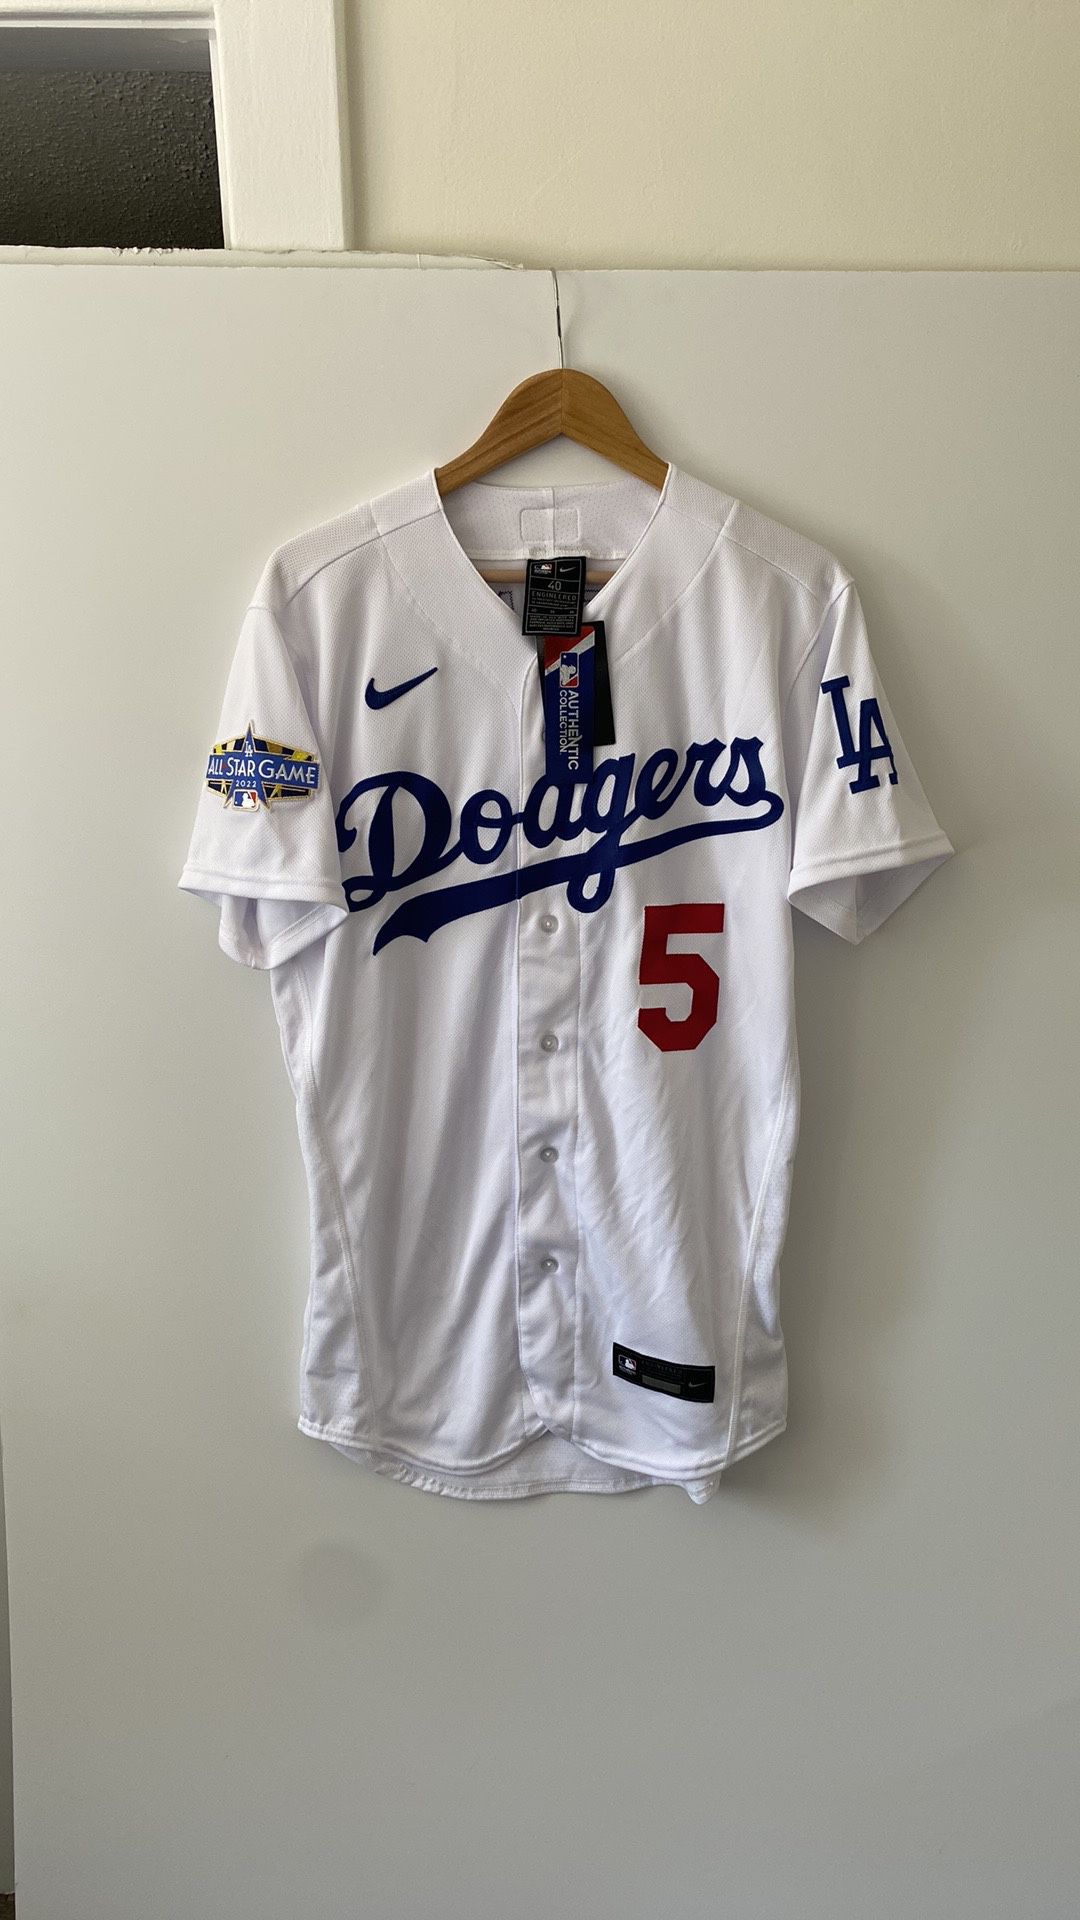 Dodgers Freddie Freeman Jersey for Sale in South Gate, CA - OfferUp